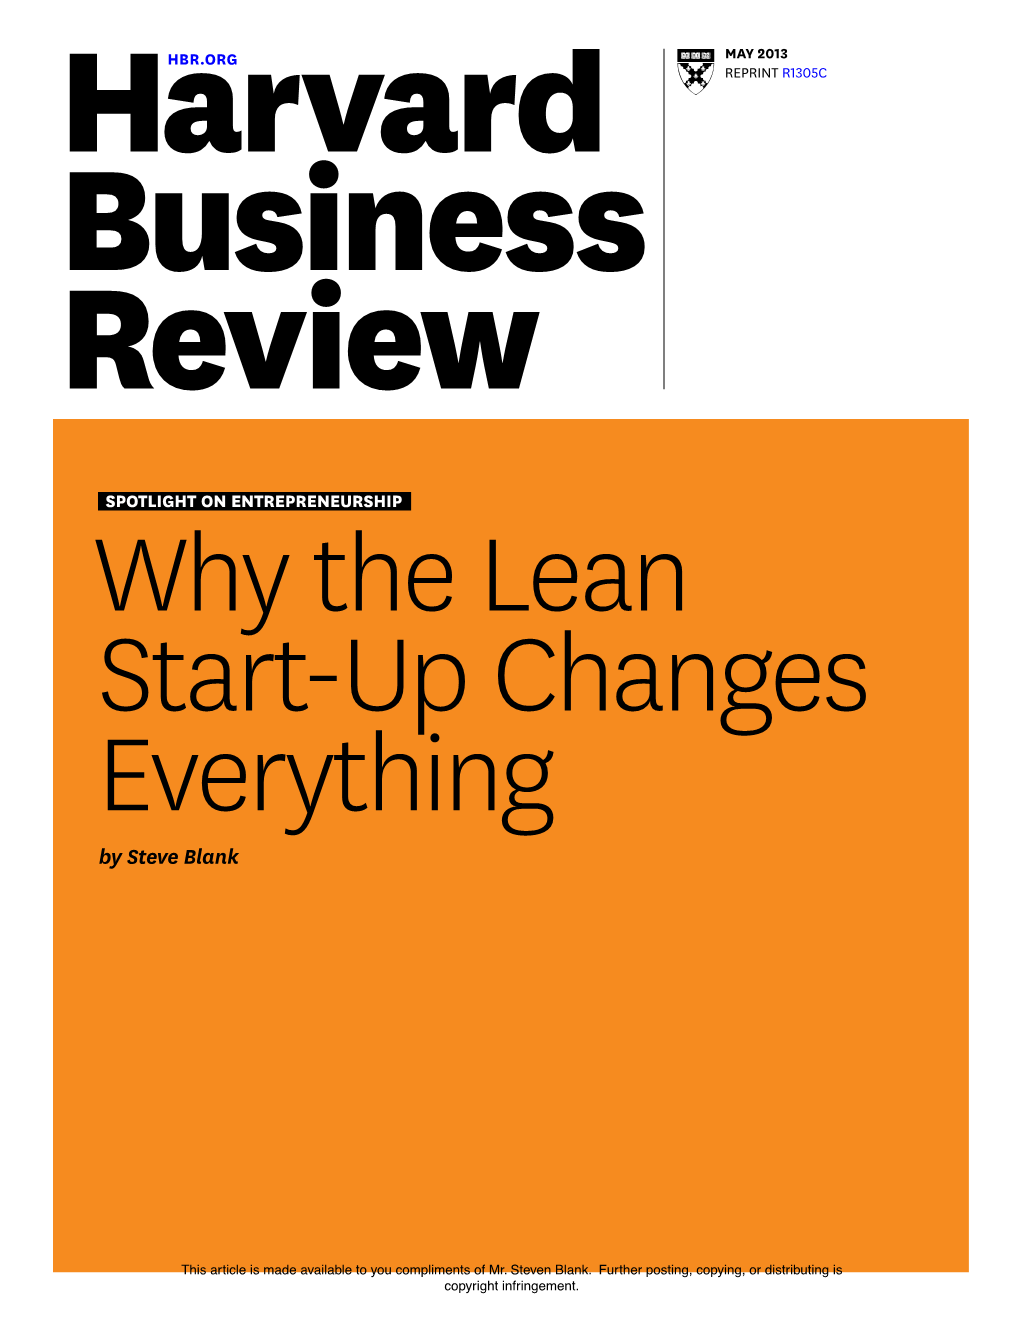 Why the Lean Startup Changes Everything